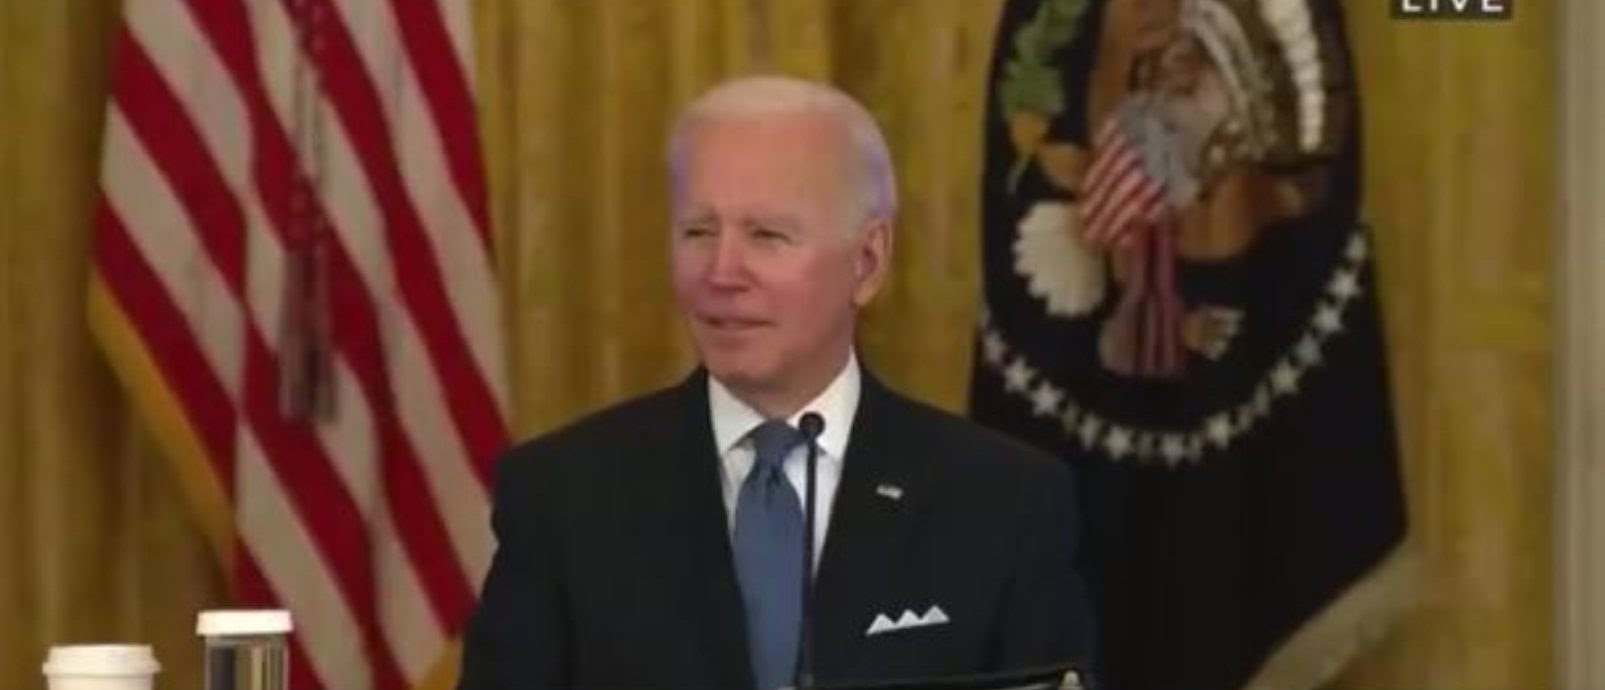 Hot Mic Catches Biden Calling Peter Doocy ‘A Stupid Son-Of-A-B*tch’